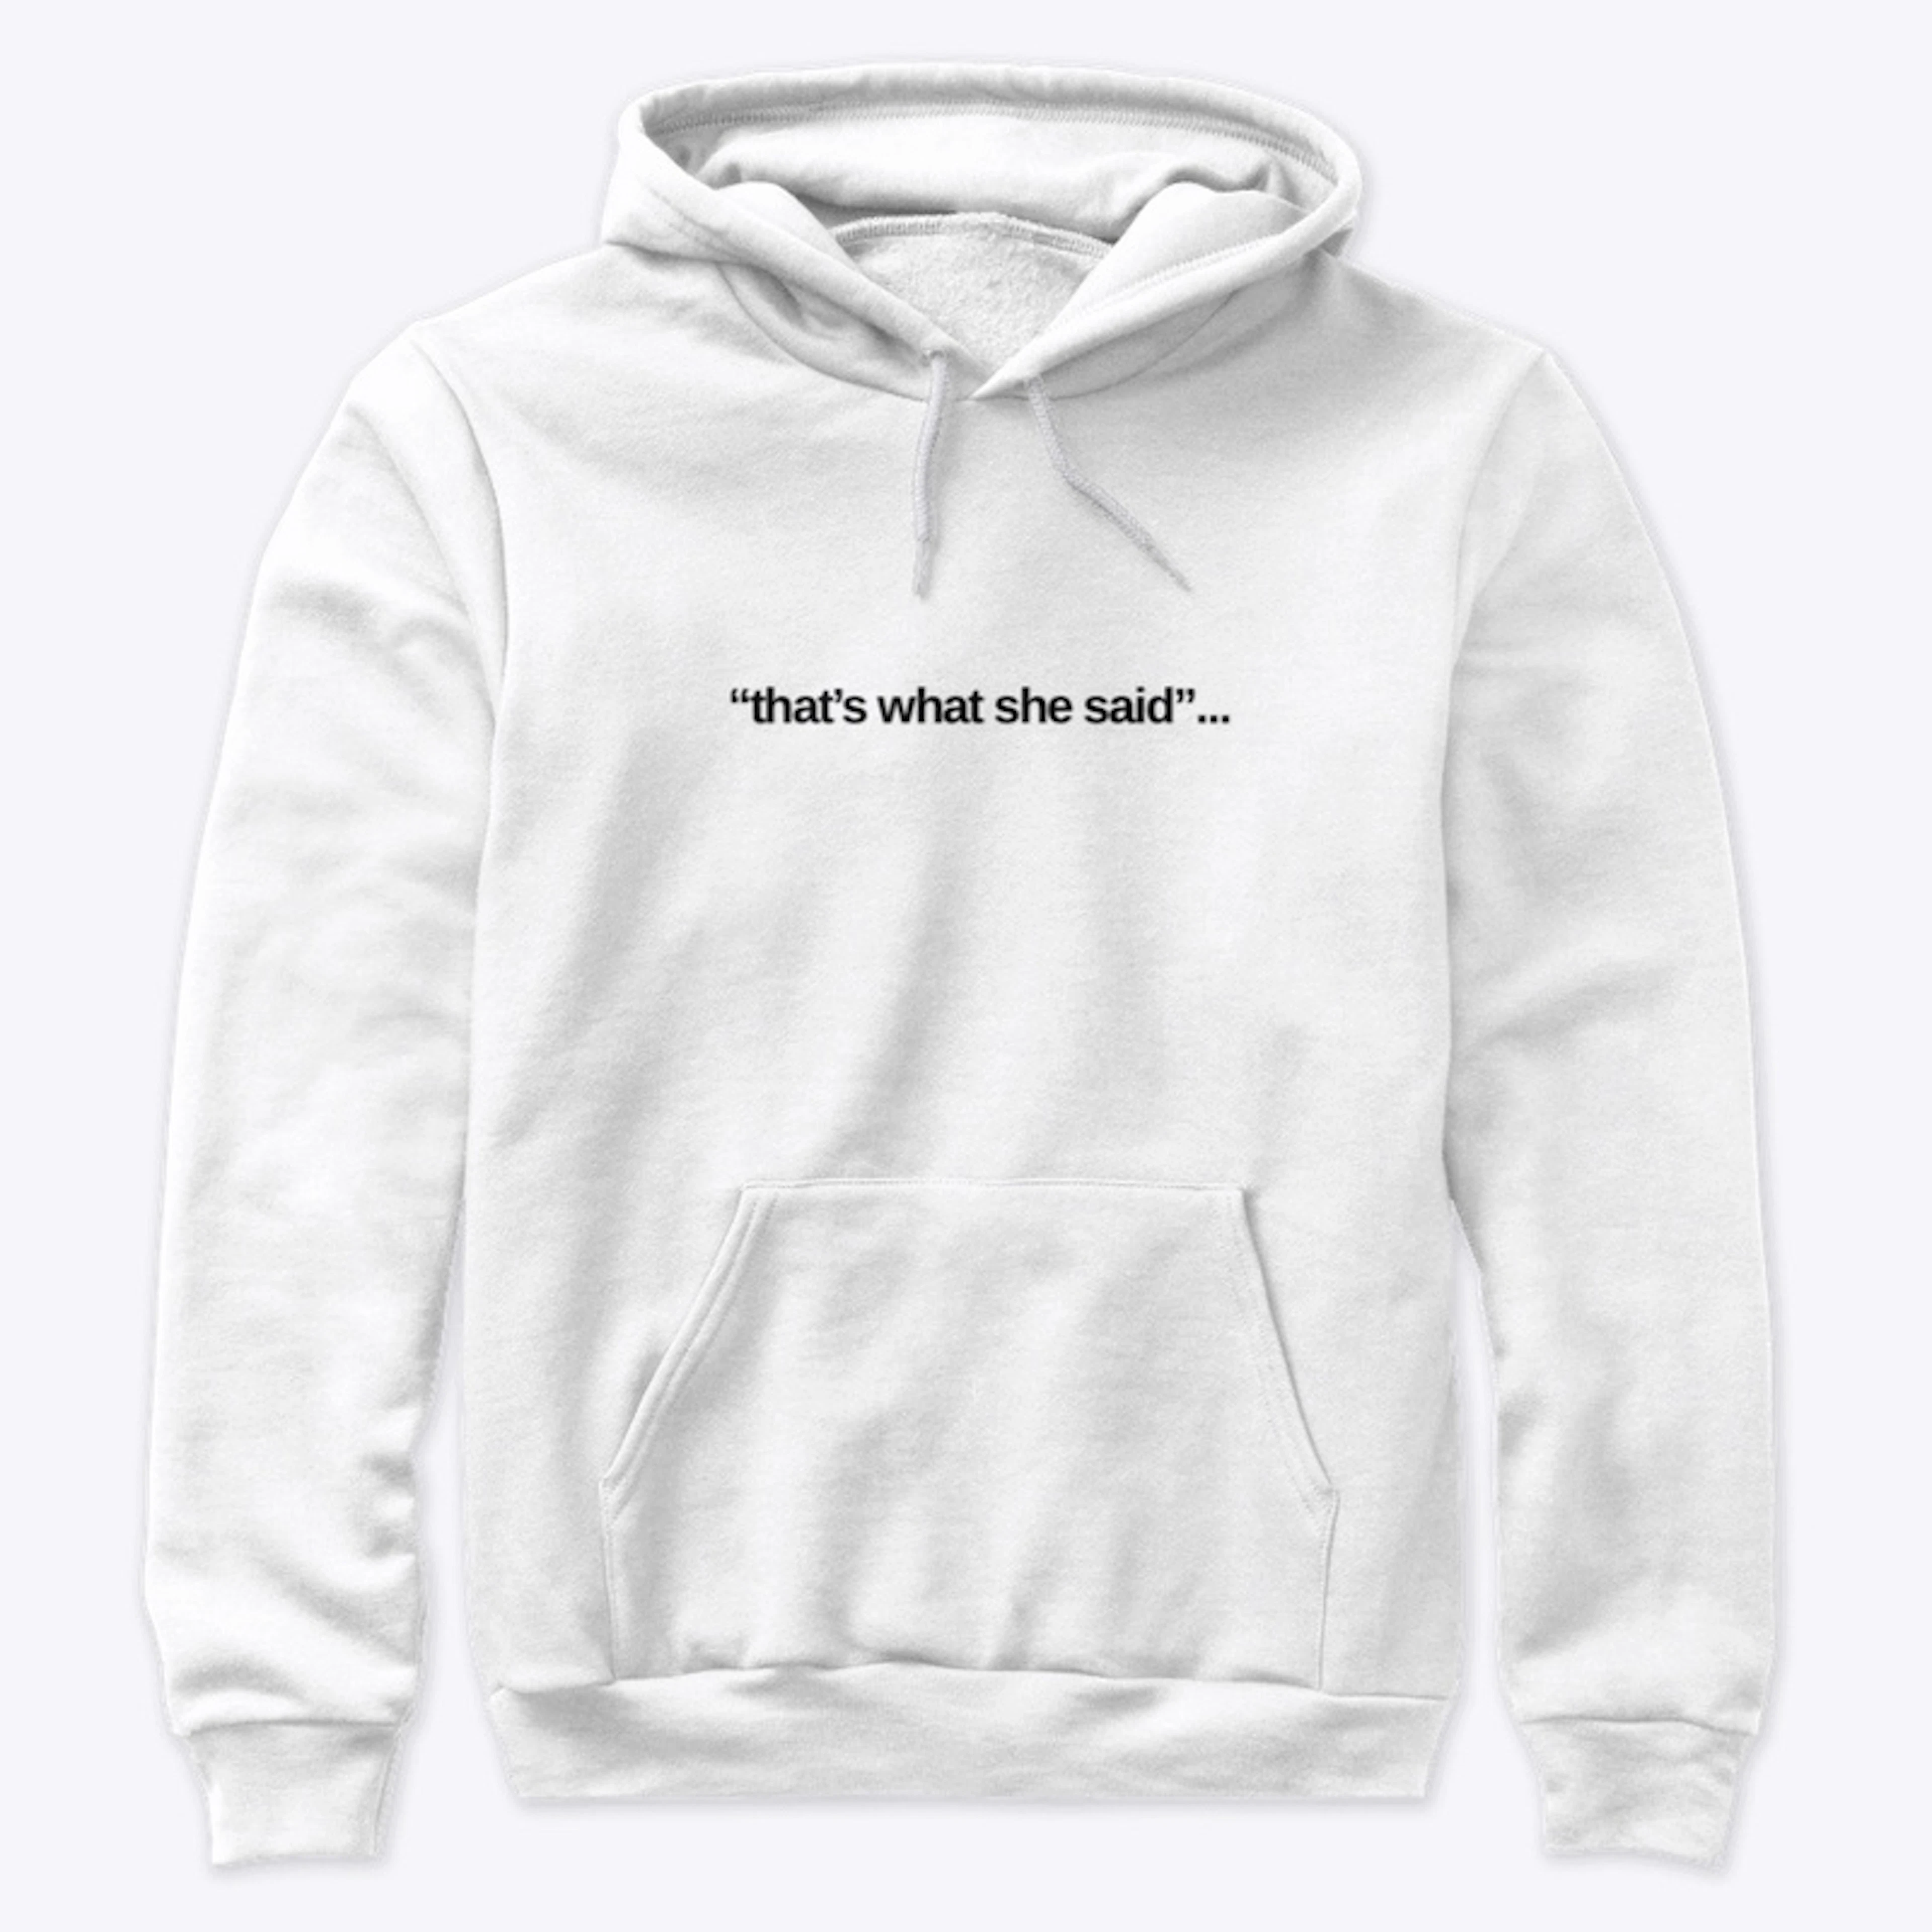 "That's what she said"... apparel 